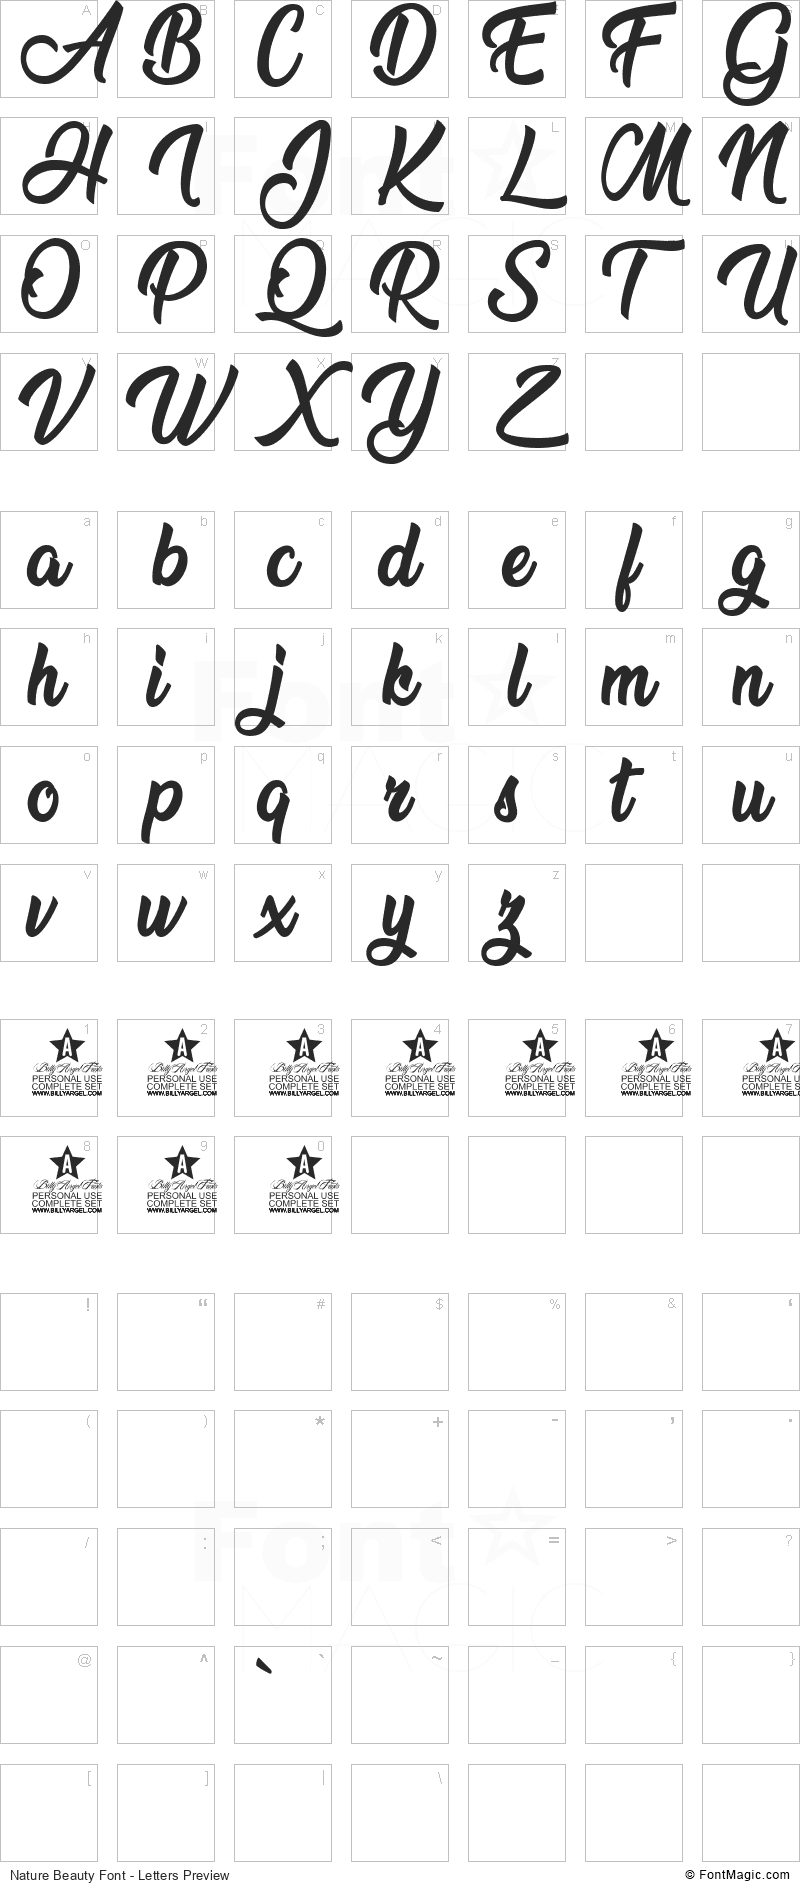 Nature Beauty Font - All Latters Preview Chart